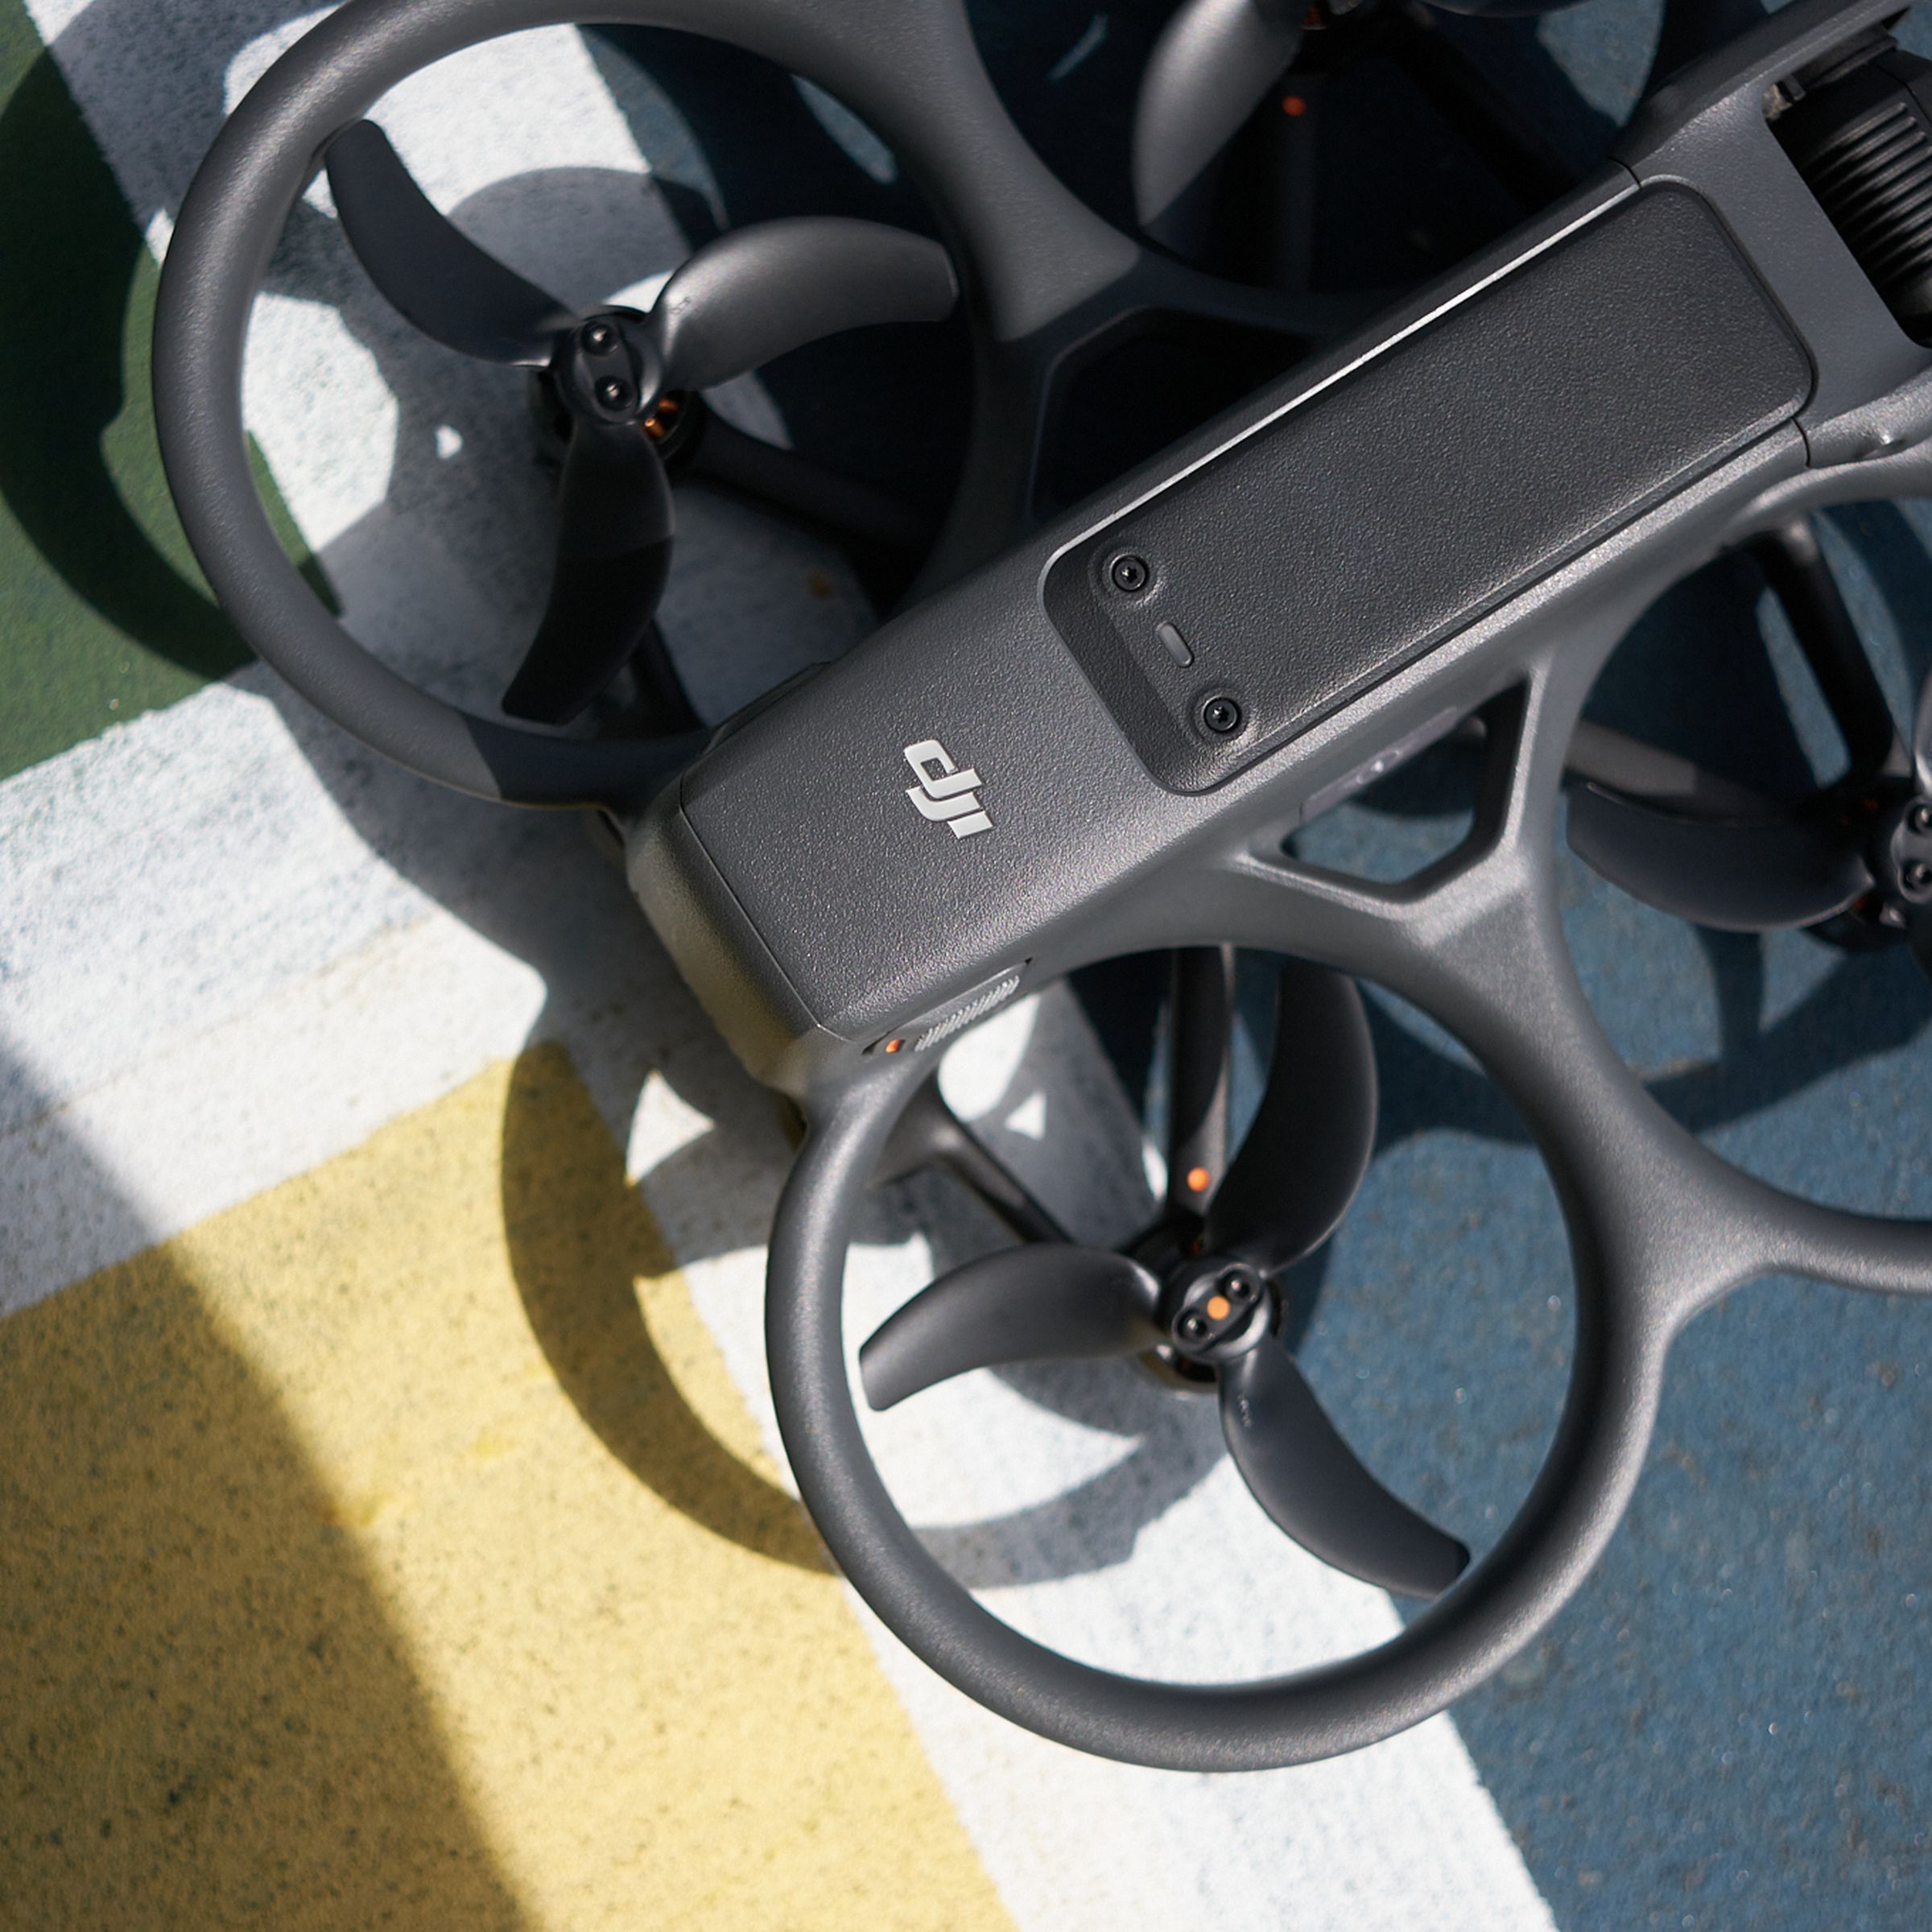 Three-quarters of the image are filled with the frame and three-bladed ducted propellors of a quadcopter drone with a slim gray body and a camera at one end.